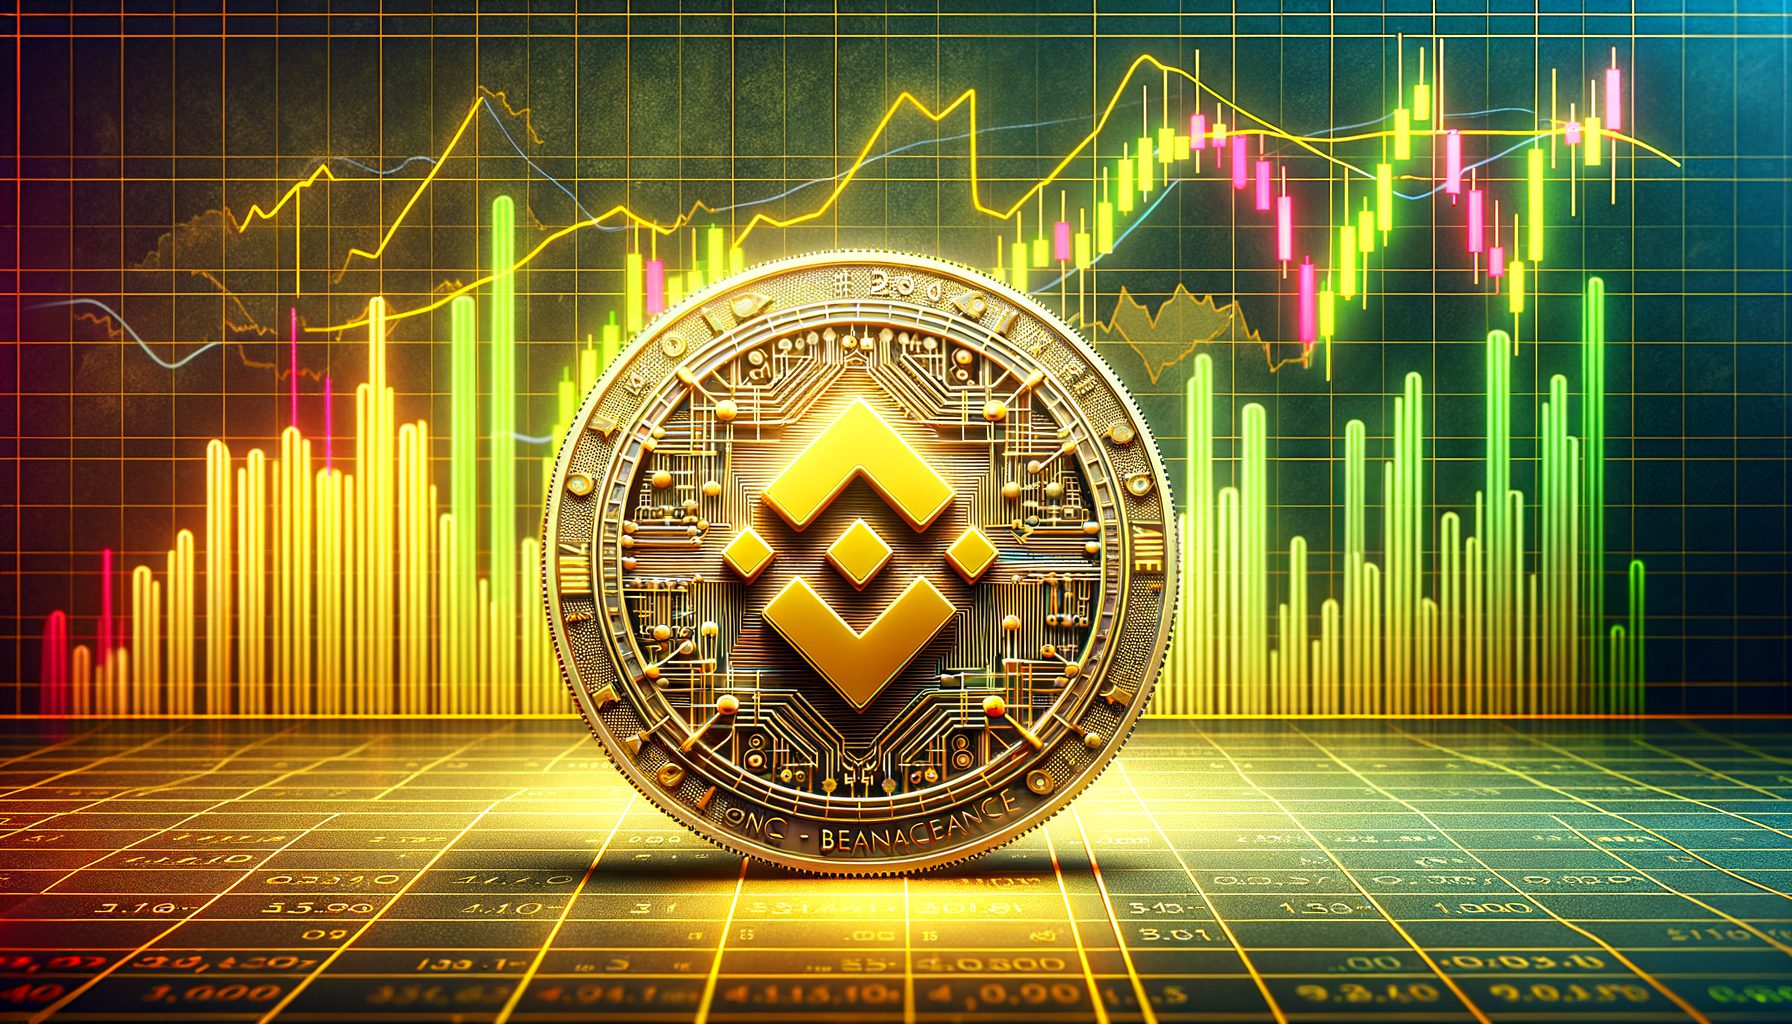 This Binance-Sponsored DeFi Coin Has Surged 600% in the Past Week